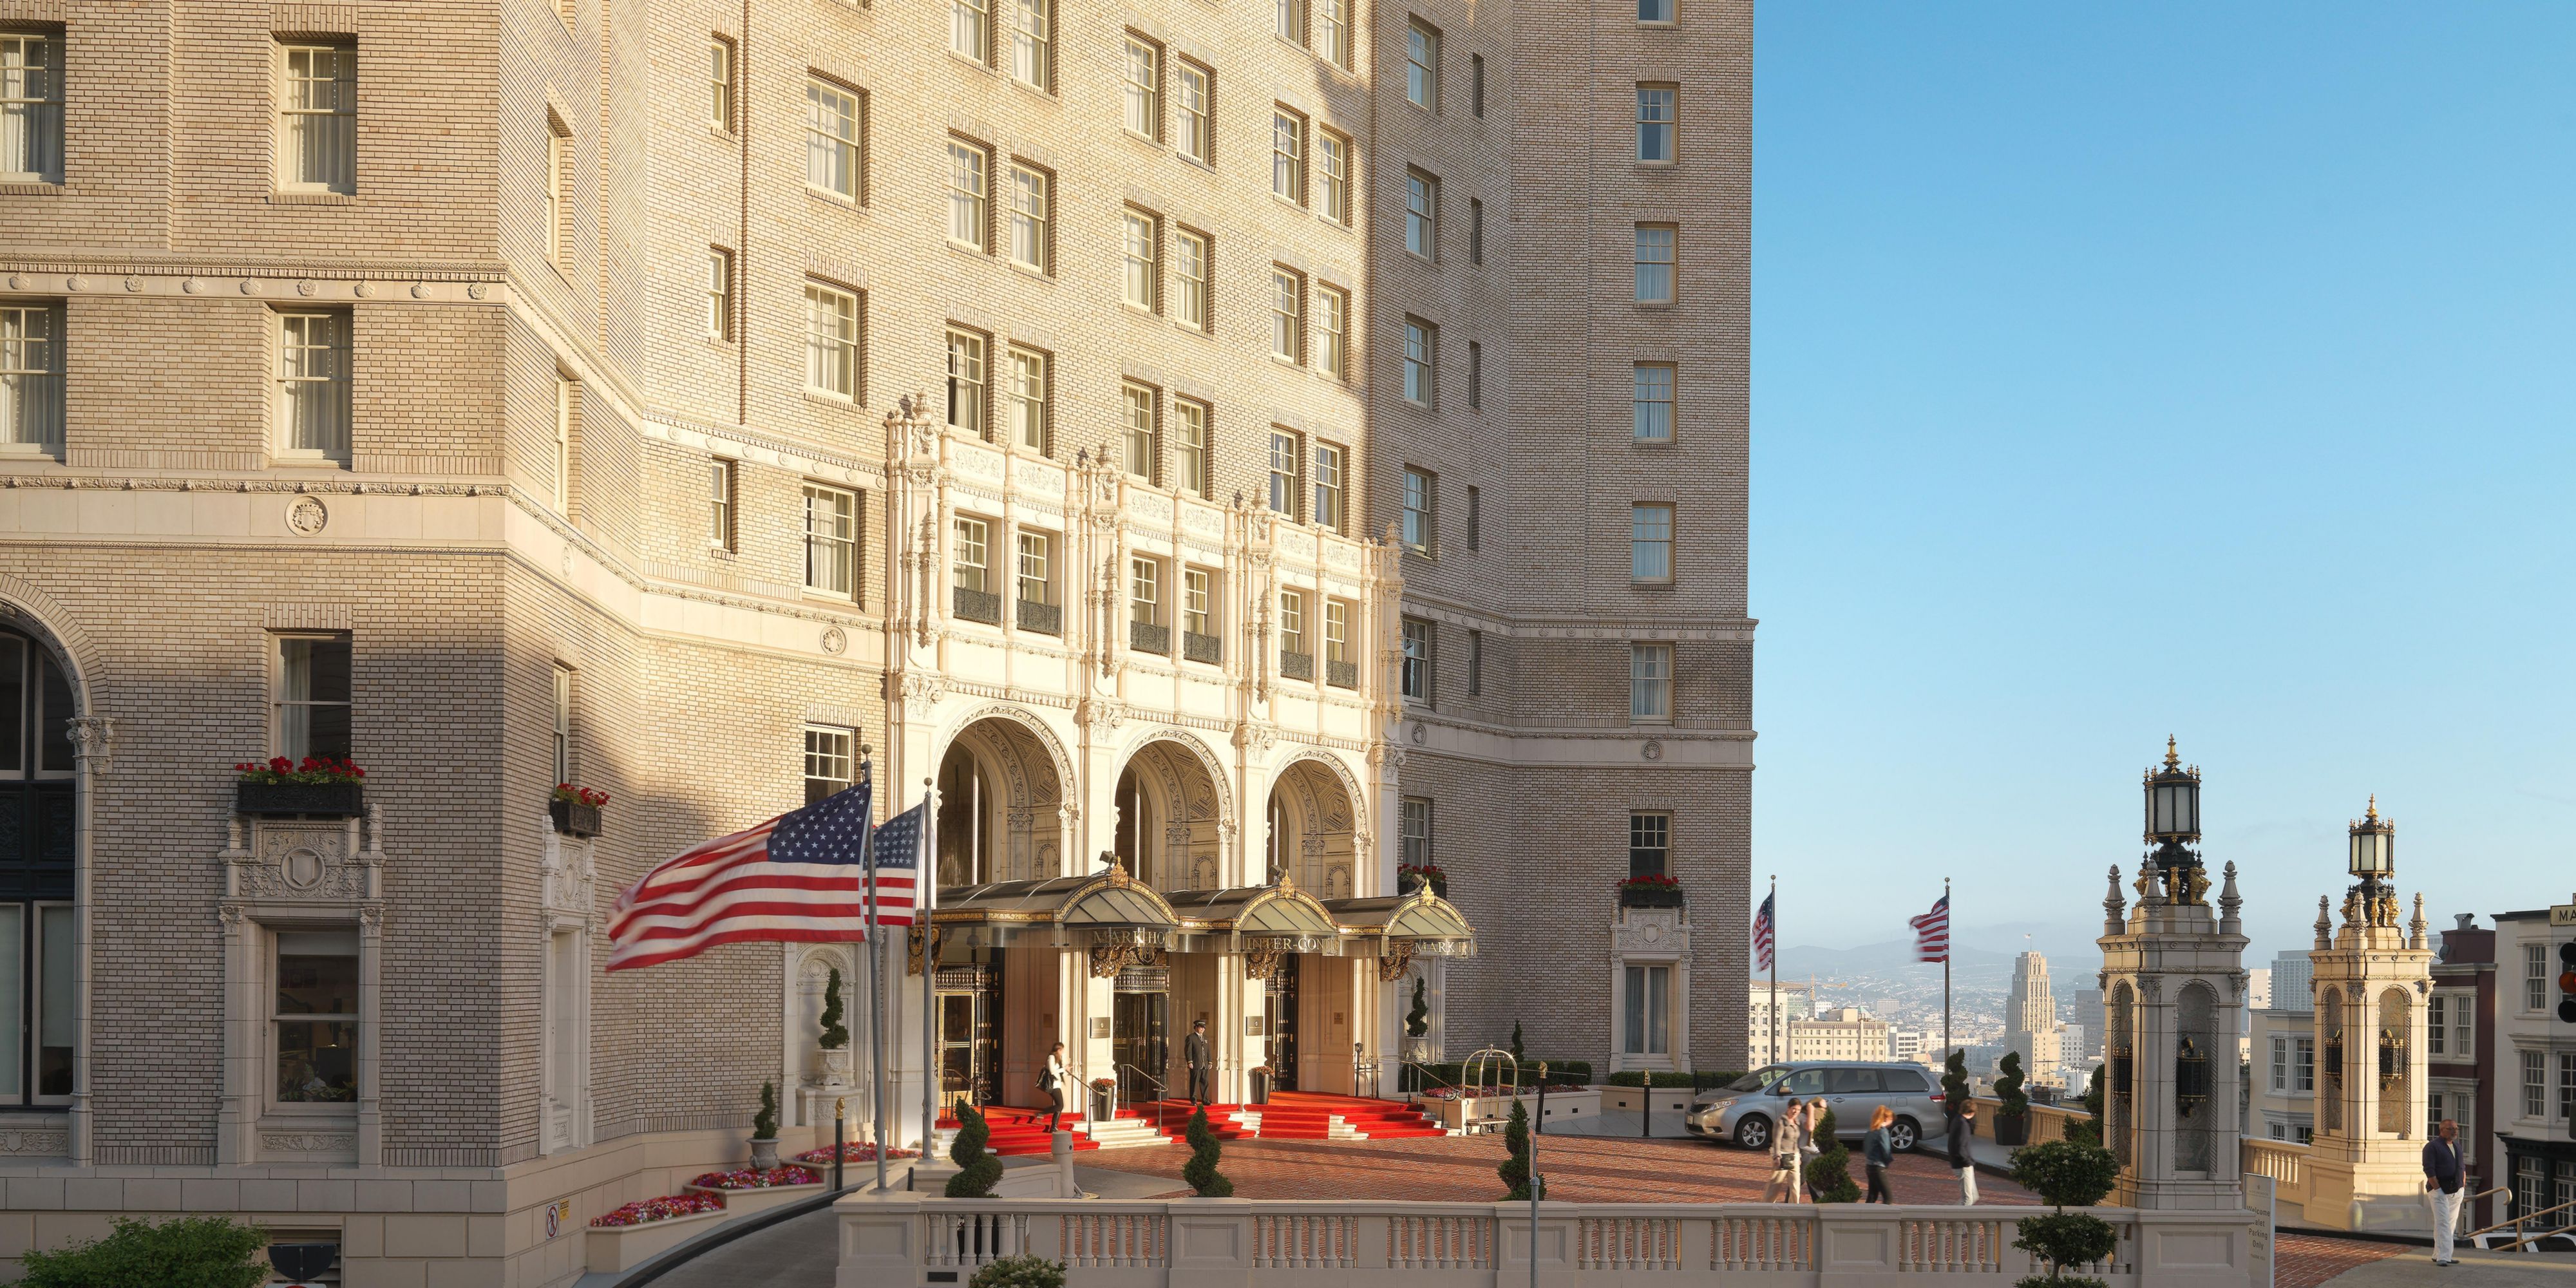 Our renowned hotel has a long-established legacy of service excellence, thanks to our caring and experienced team. Let our knowledgeable concierge curate your San Francisco itinerary so you can focus on enjoying your stay. We're committed to delivering genuine hospitality while you're visiting us in the City by the Bay.